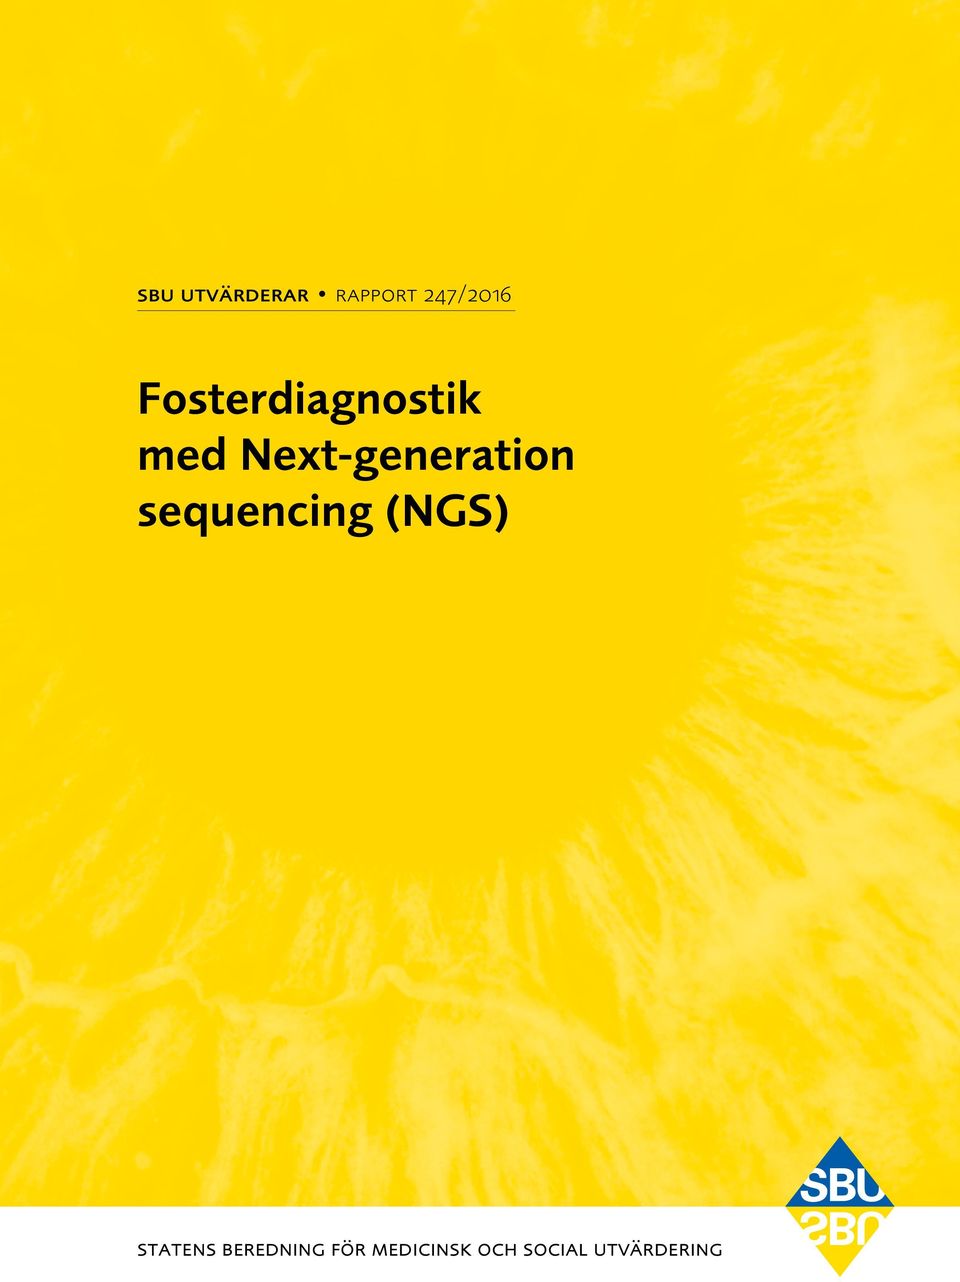 Next-generation sequencing (NGS)